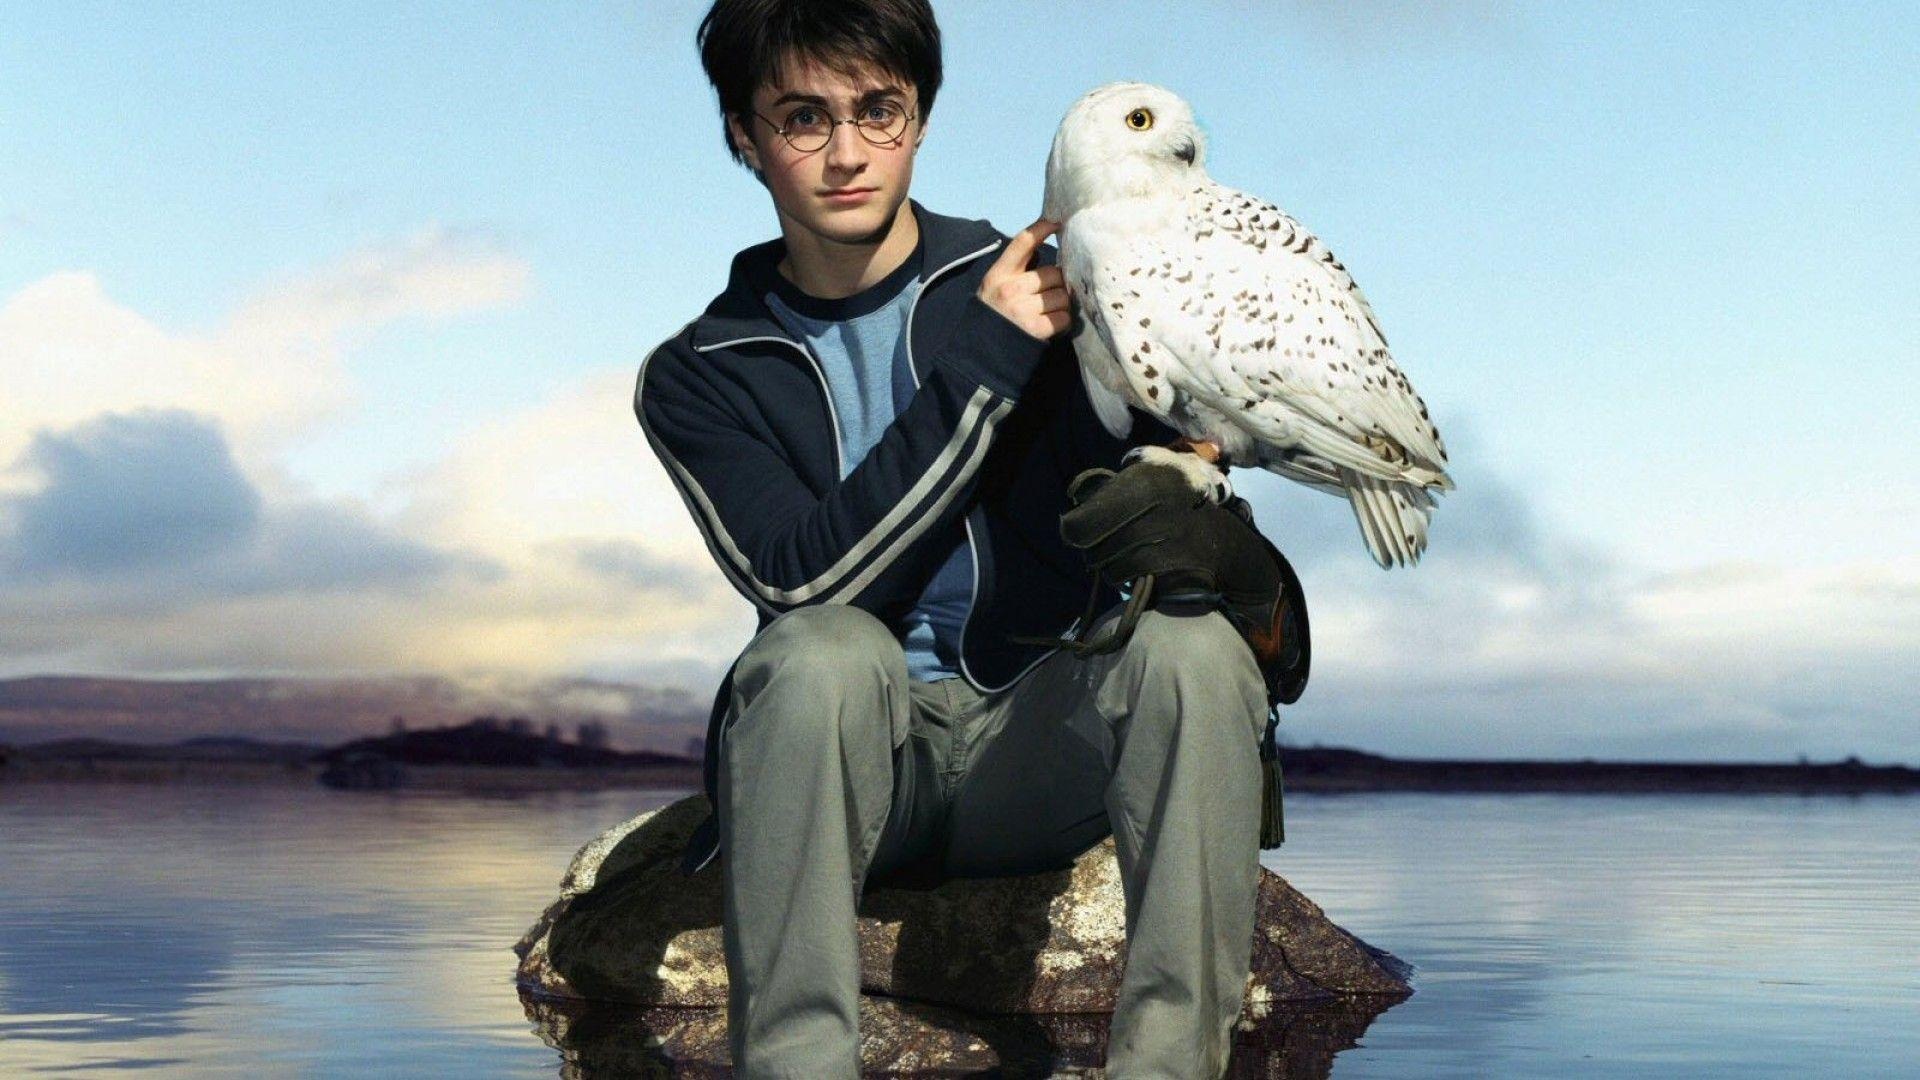 Hedwig: Has been portrayed in the Harry Potter film series by various owls. 1920x1080 Full HD Wallpaper.